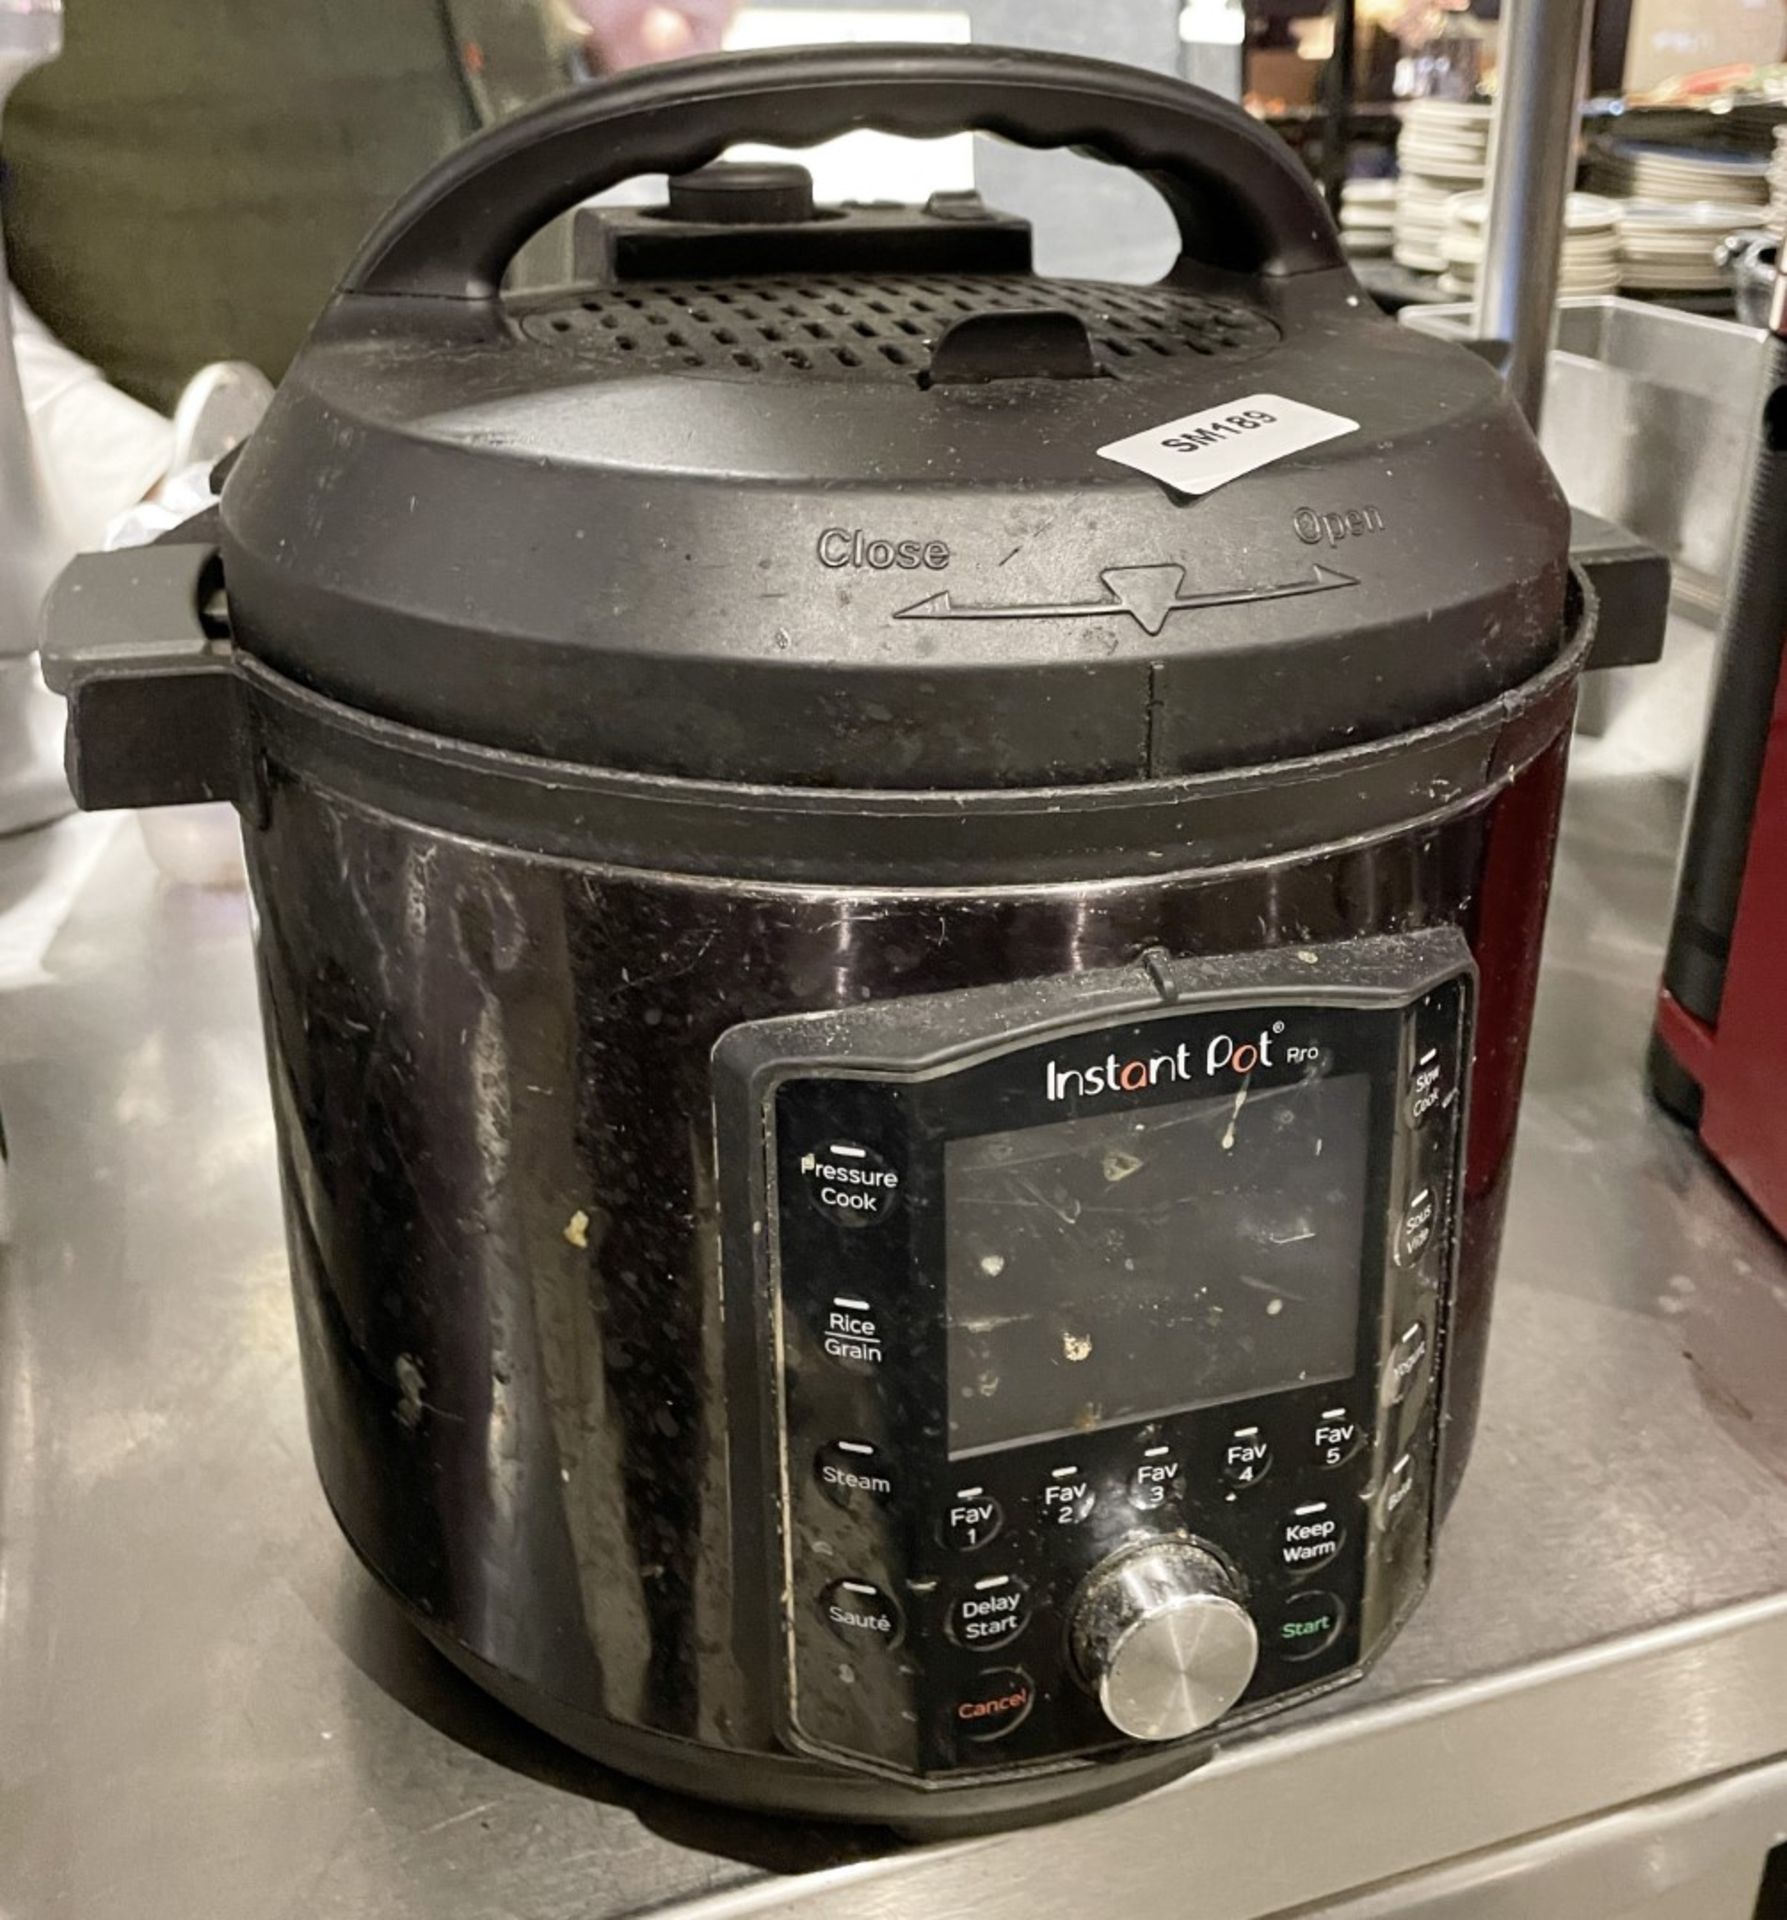 1 x Instat Pot Pro 60 10 in 1 Multi Cooker - 5.7L - Features Include Slow Cooker, Sous Vide, Saute - Image 3 of 6